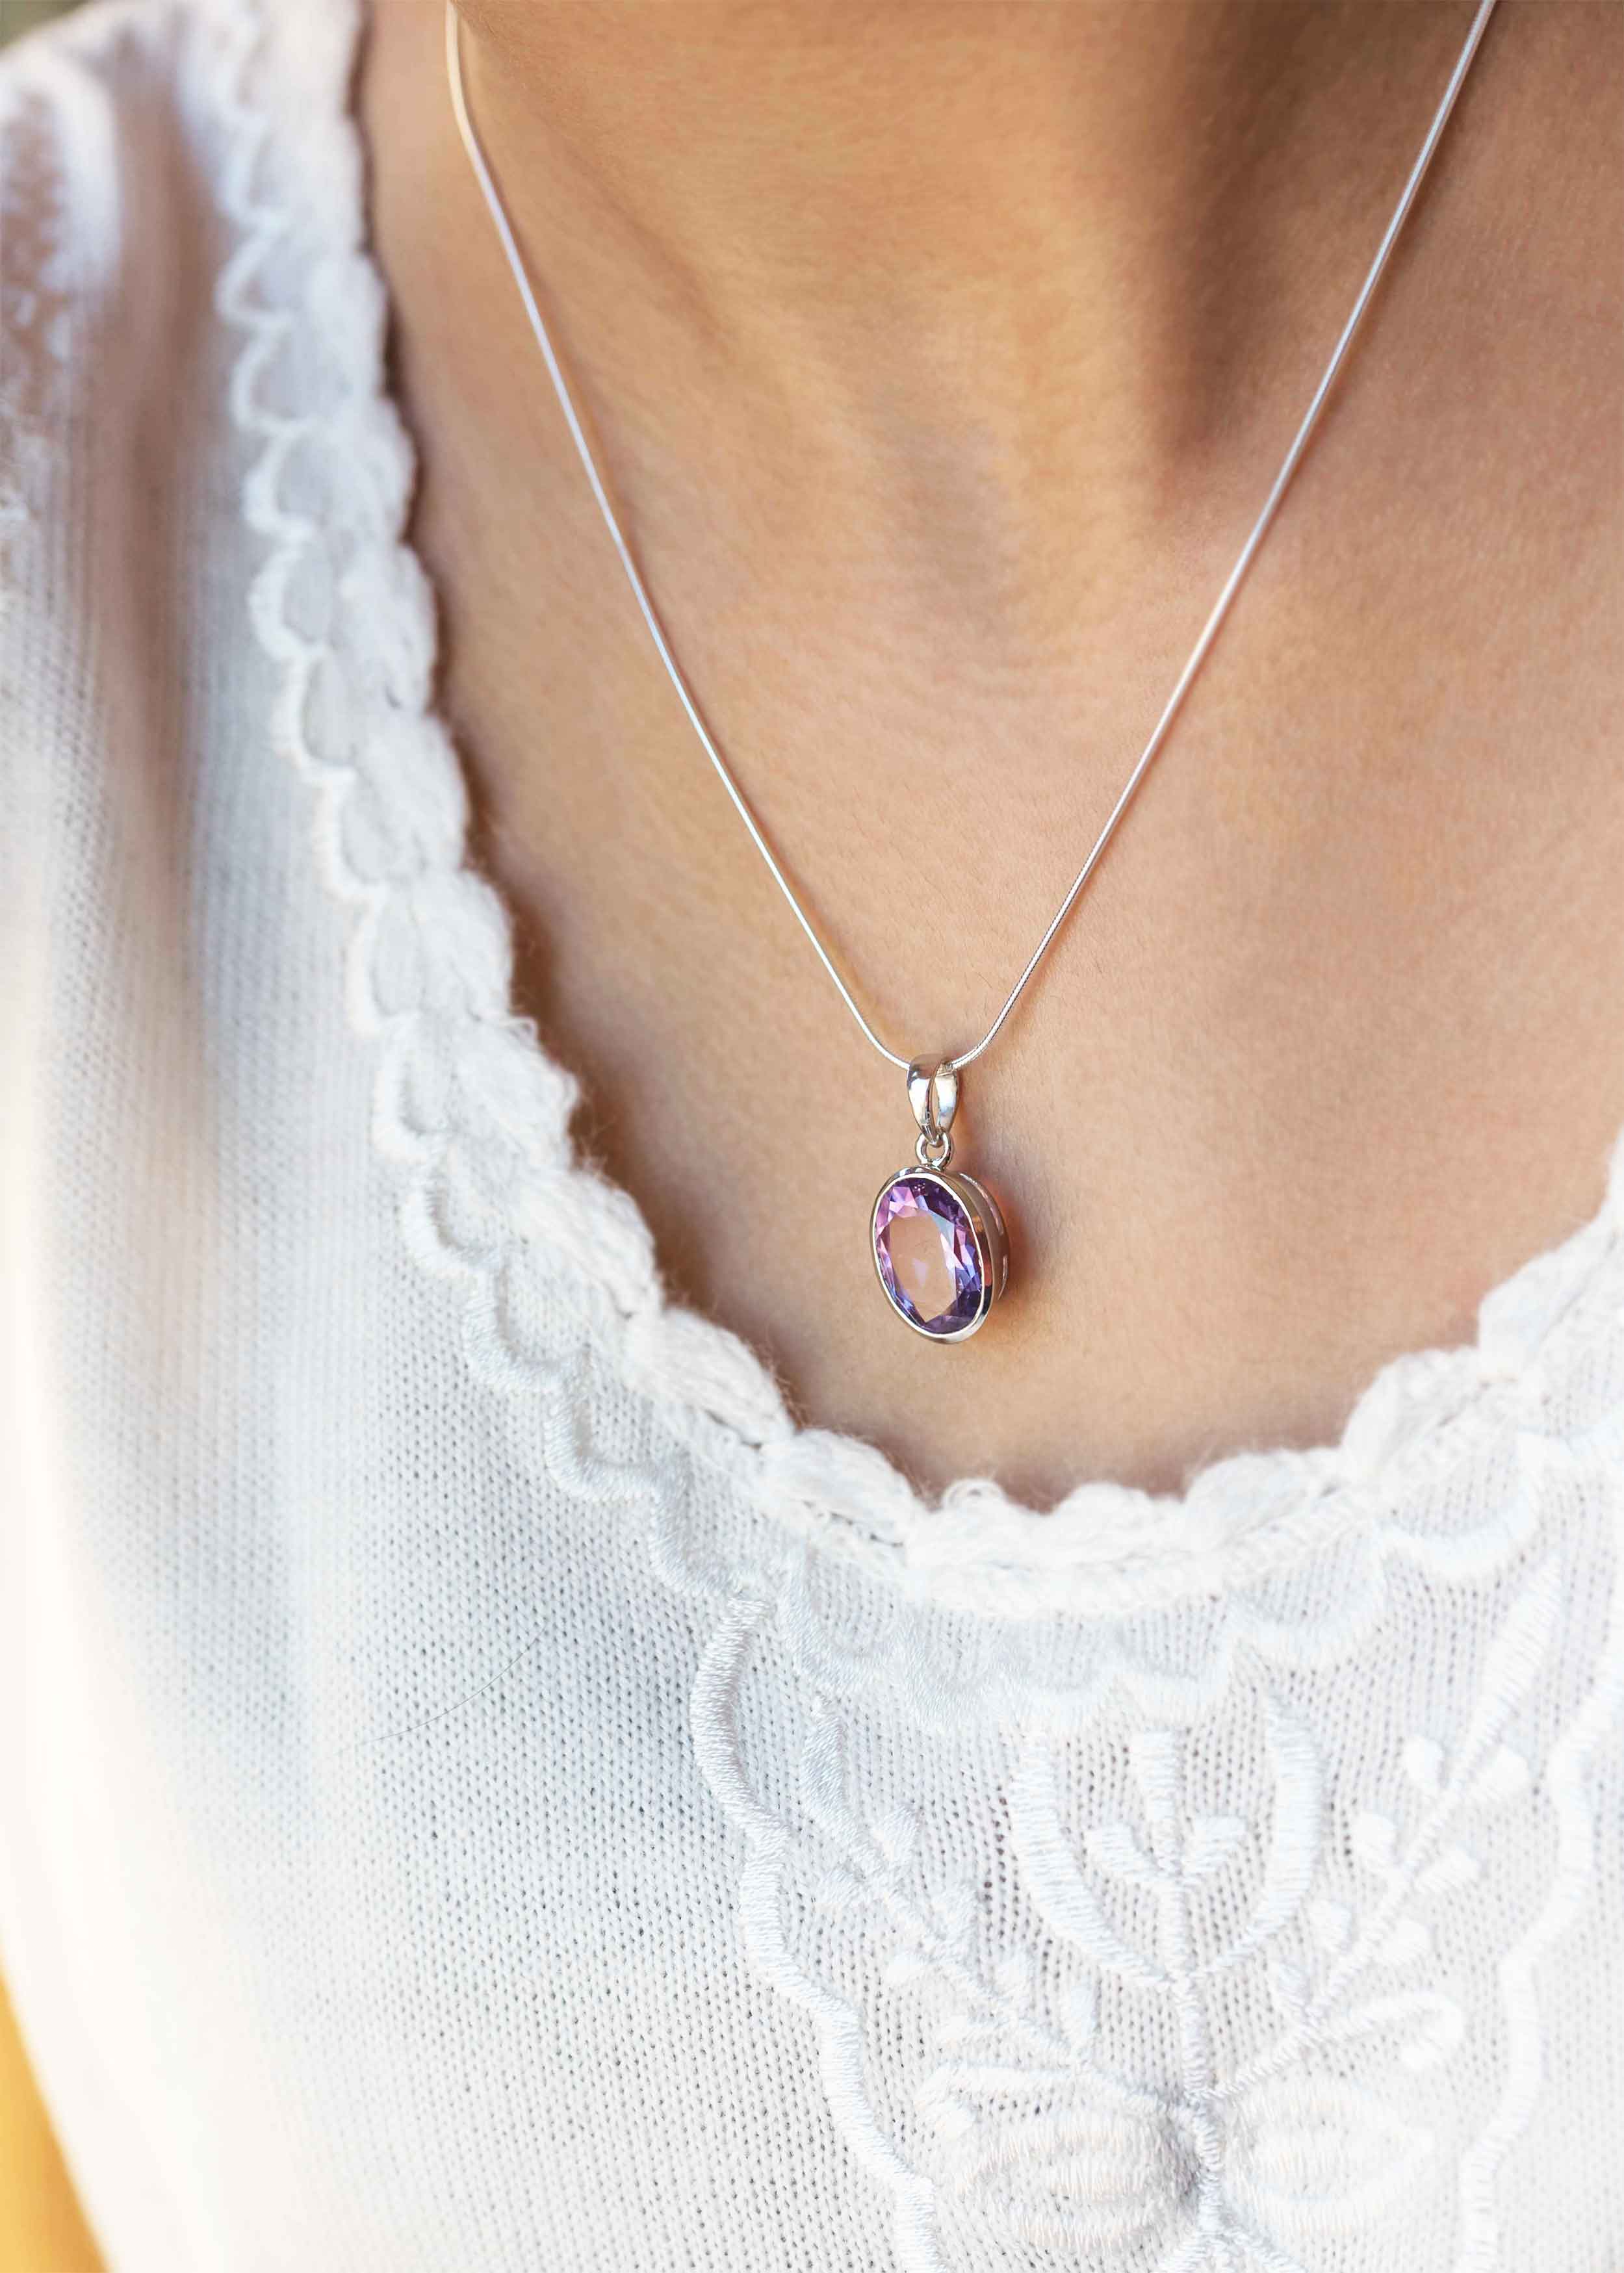 Amethyst Sterling Silver Necklace Genuine Natural Pendant Large February birthstone